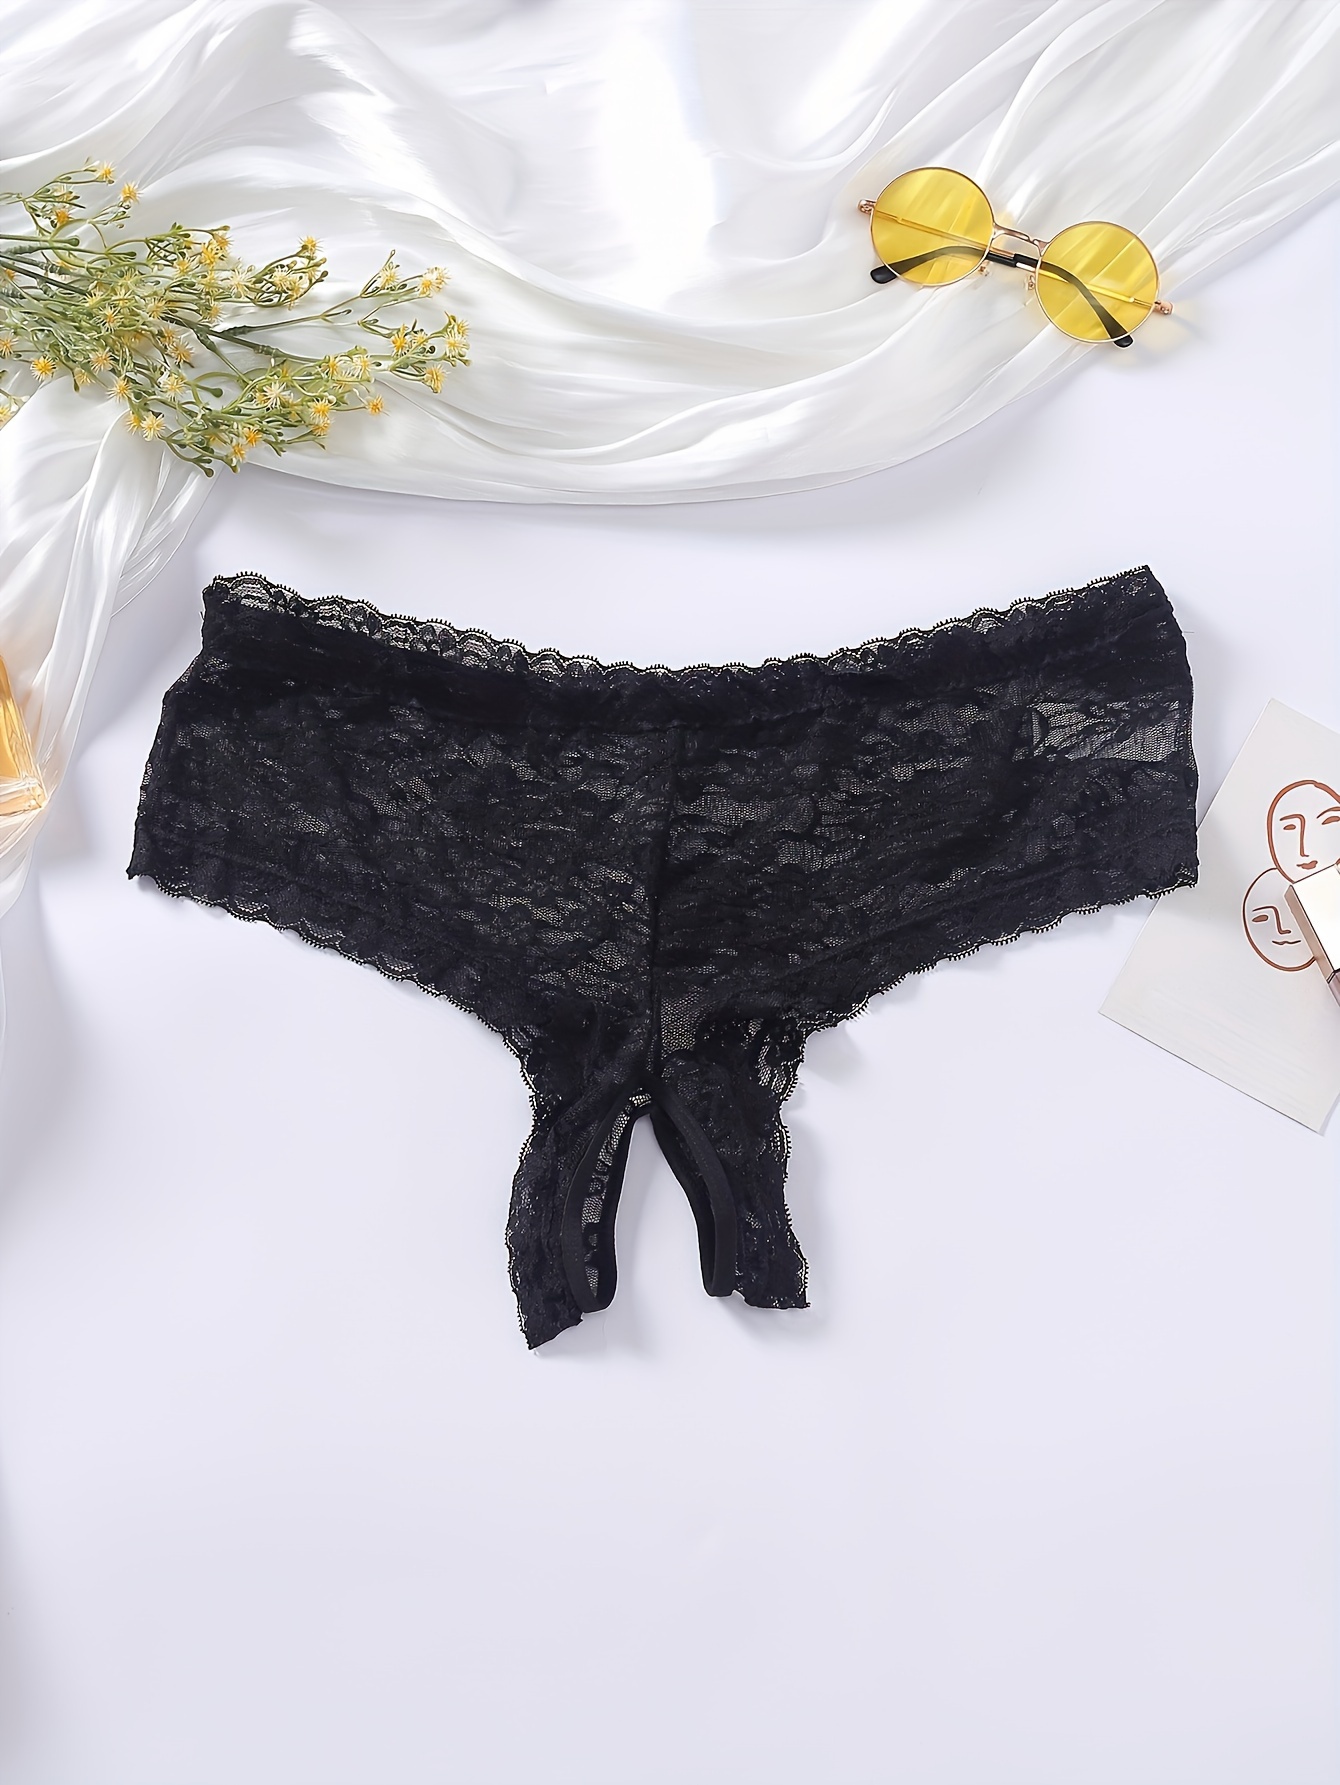  Sexy Crotchless Thong Lingerie for Women Underpants Open Crotch  Low Waist Lace Exotic Underwear (Black, One Size): Clothing, Shoes & Jewelry